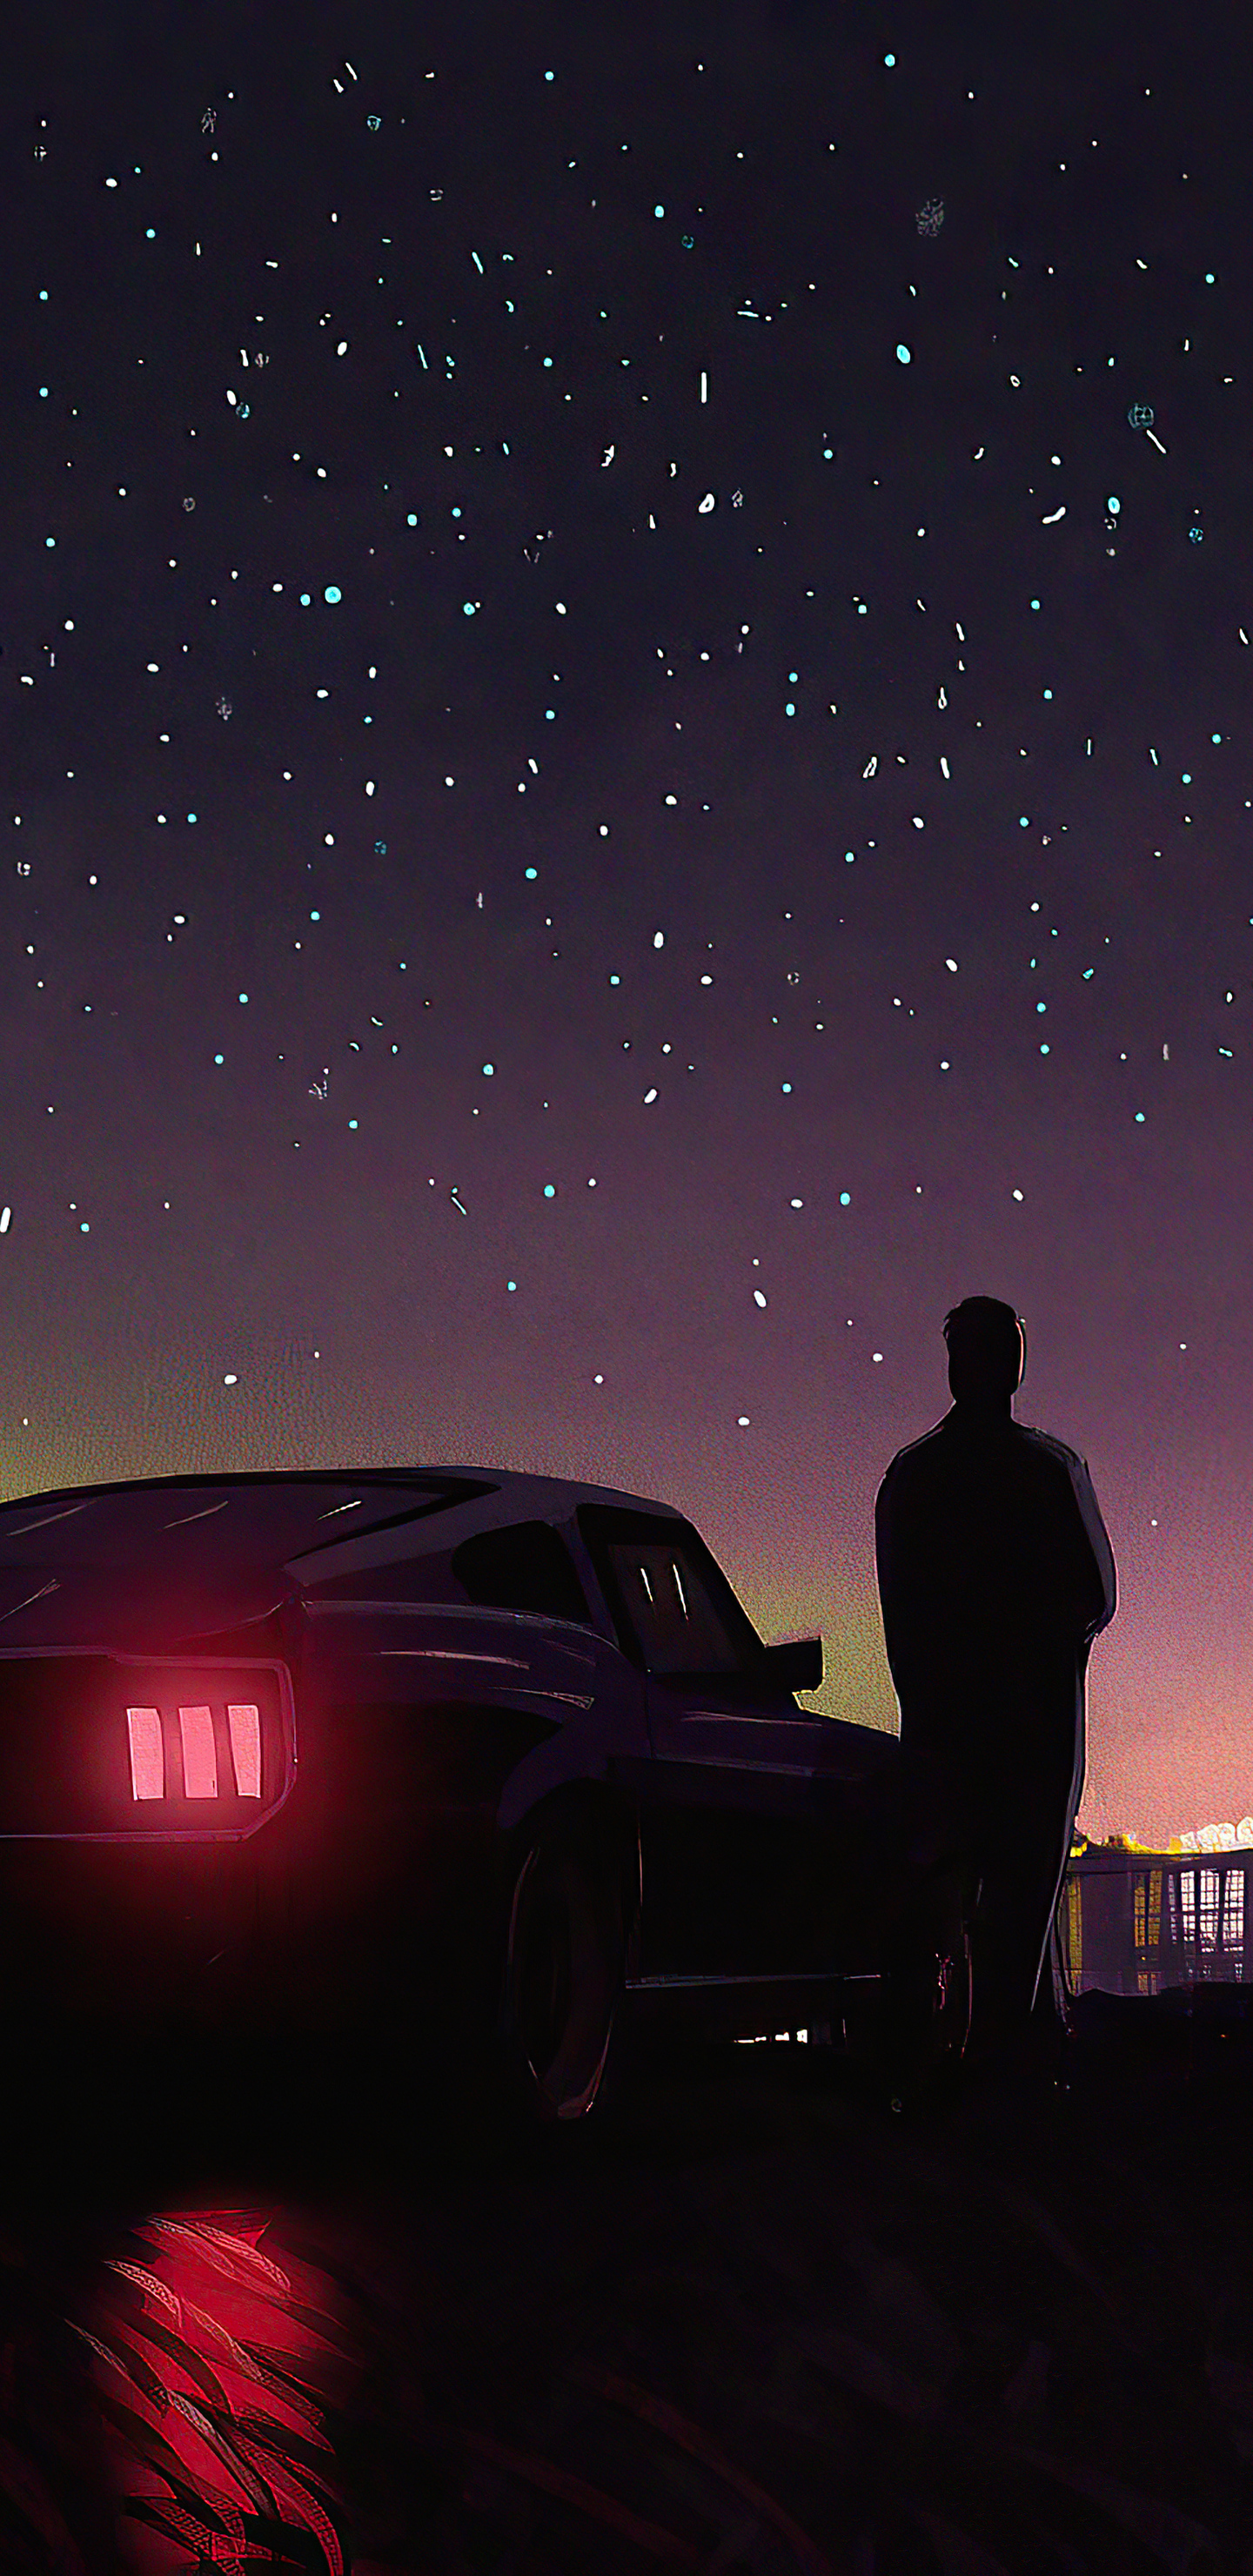 1440x2960 Retrowave Nights With Ford Mustang 4k Samsung Galaxy Note 9,8 ...